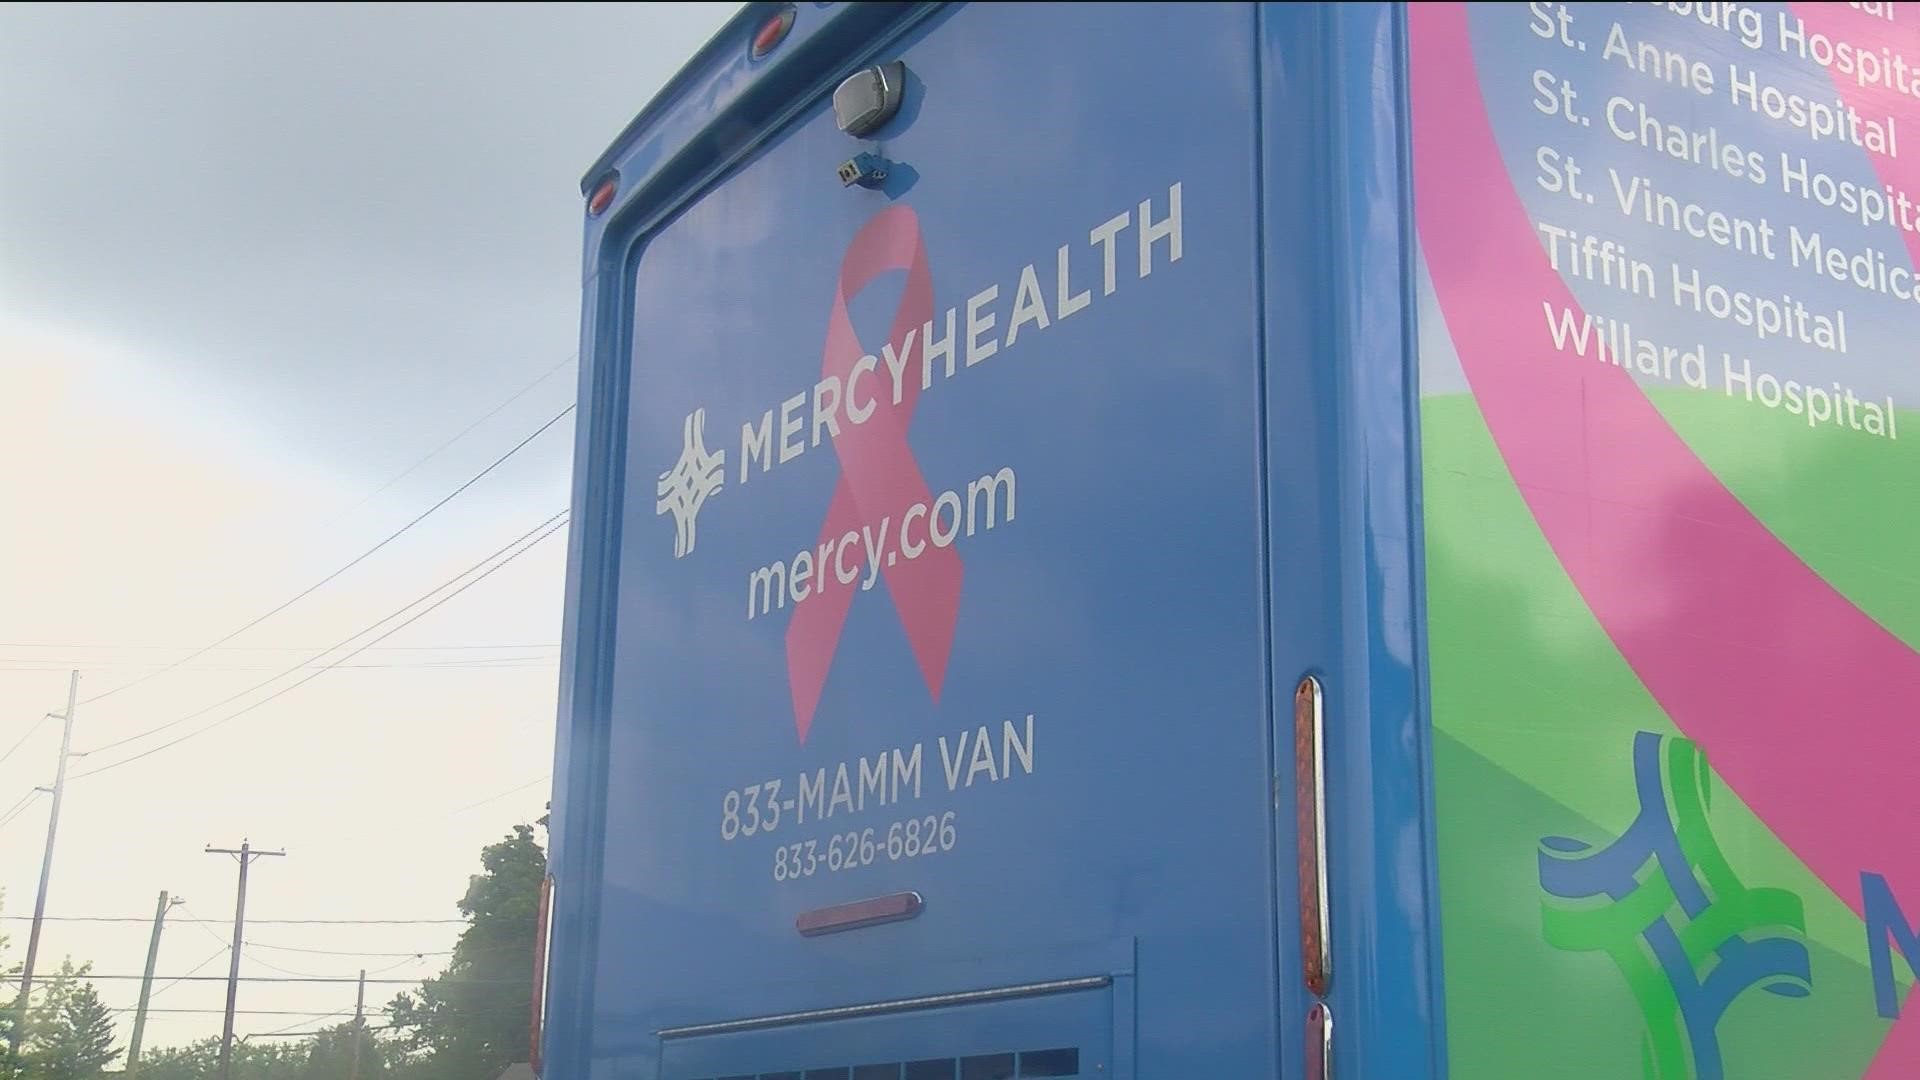 The "Mamm Van" travels to different communities across northwest Ohio, providing mammograms and screenings covered by insurance or at no cost. Call 833-MAMM-VAN.